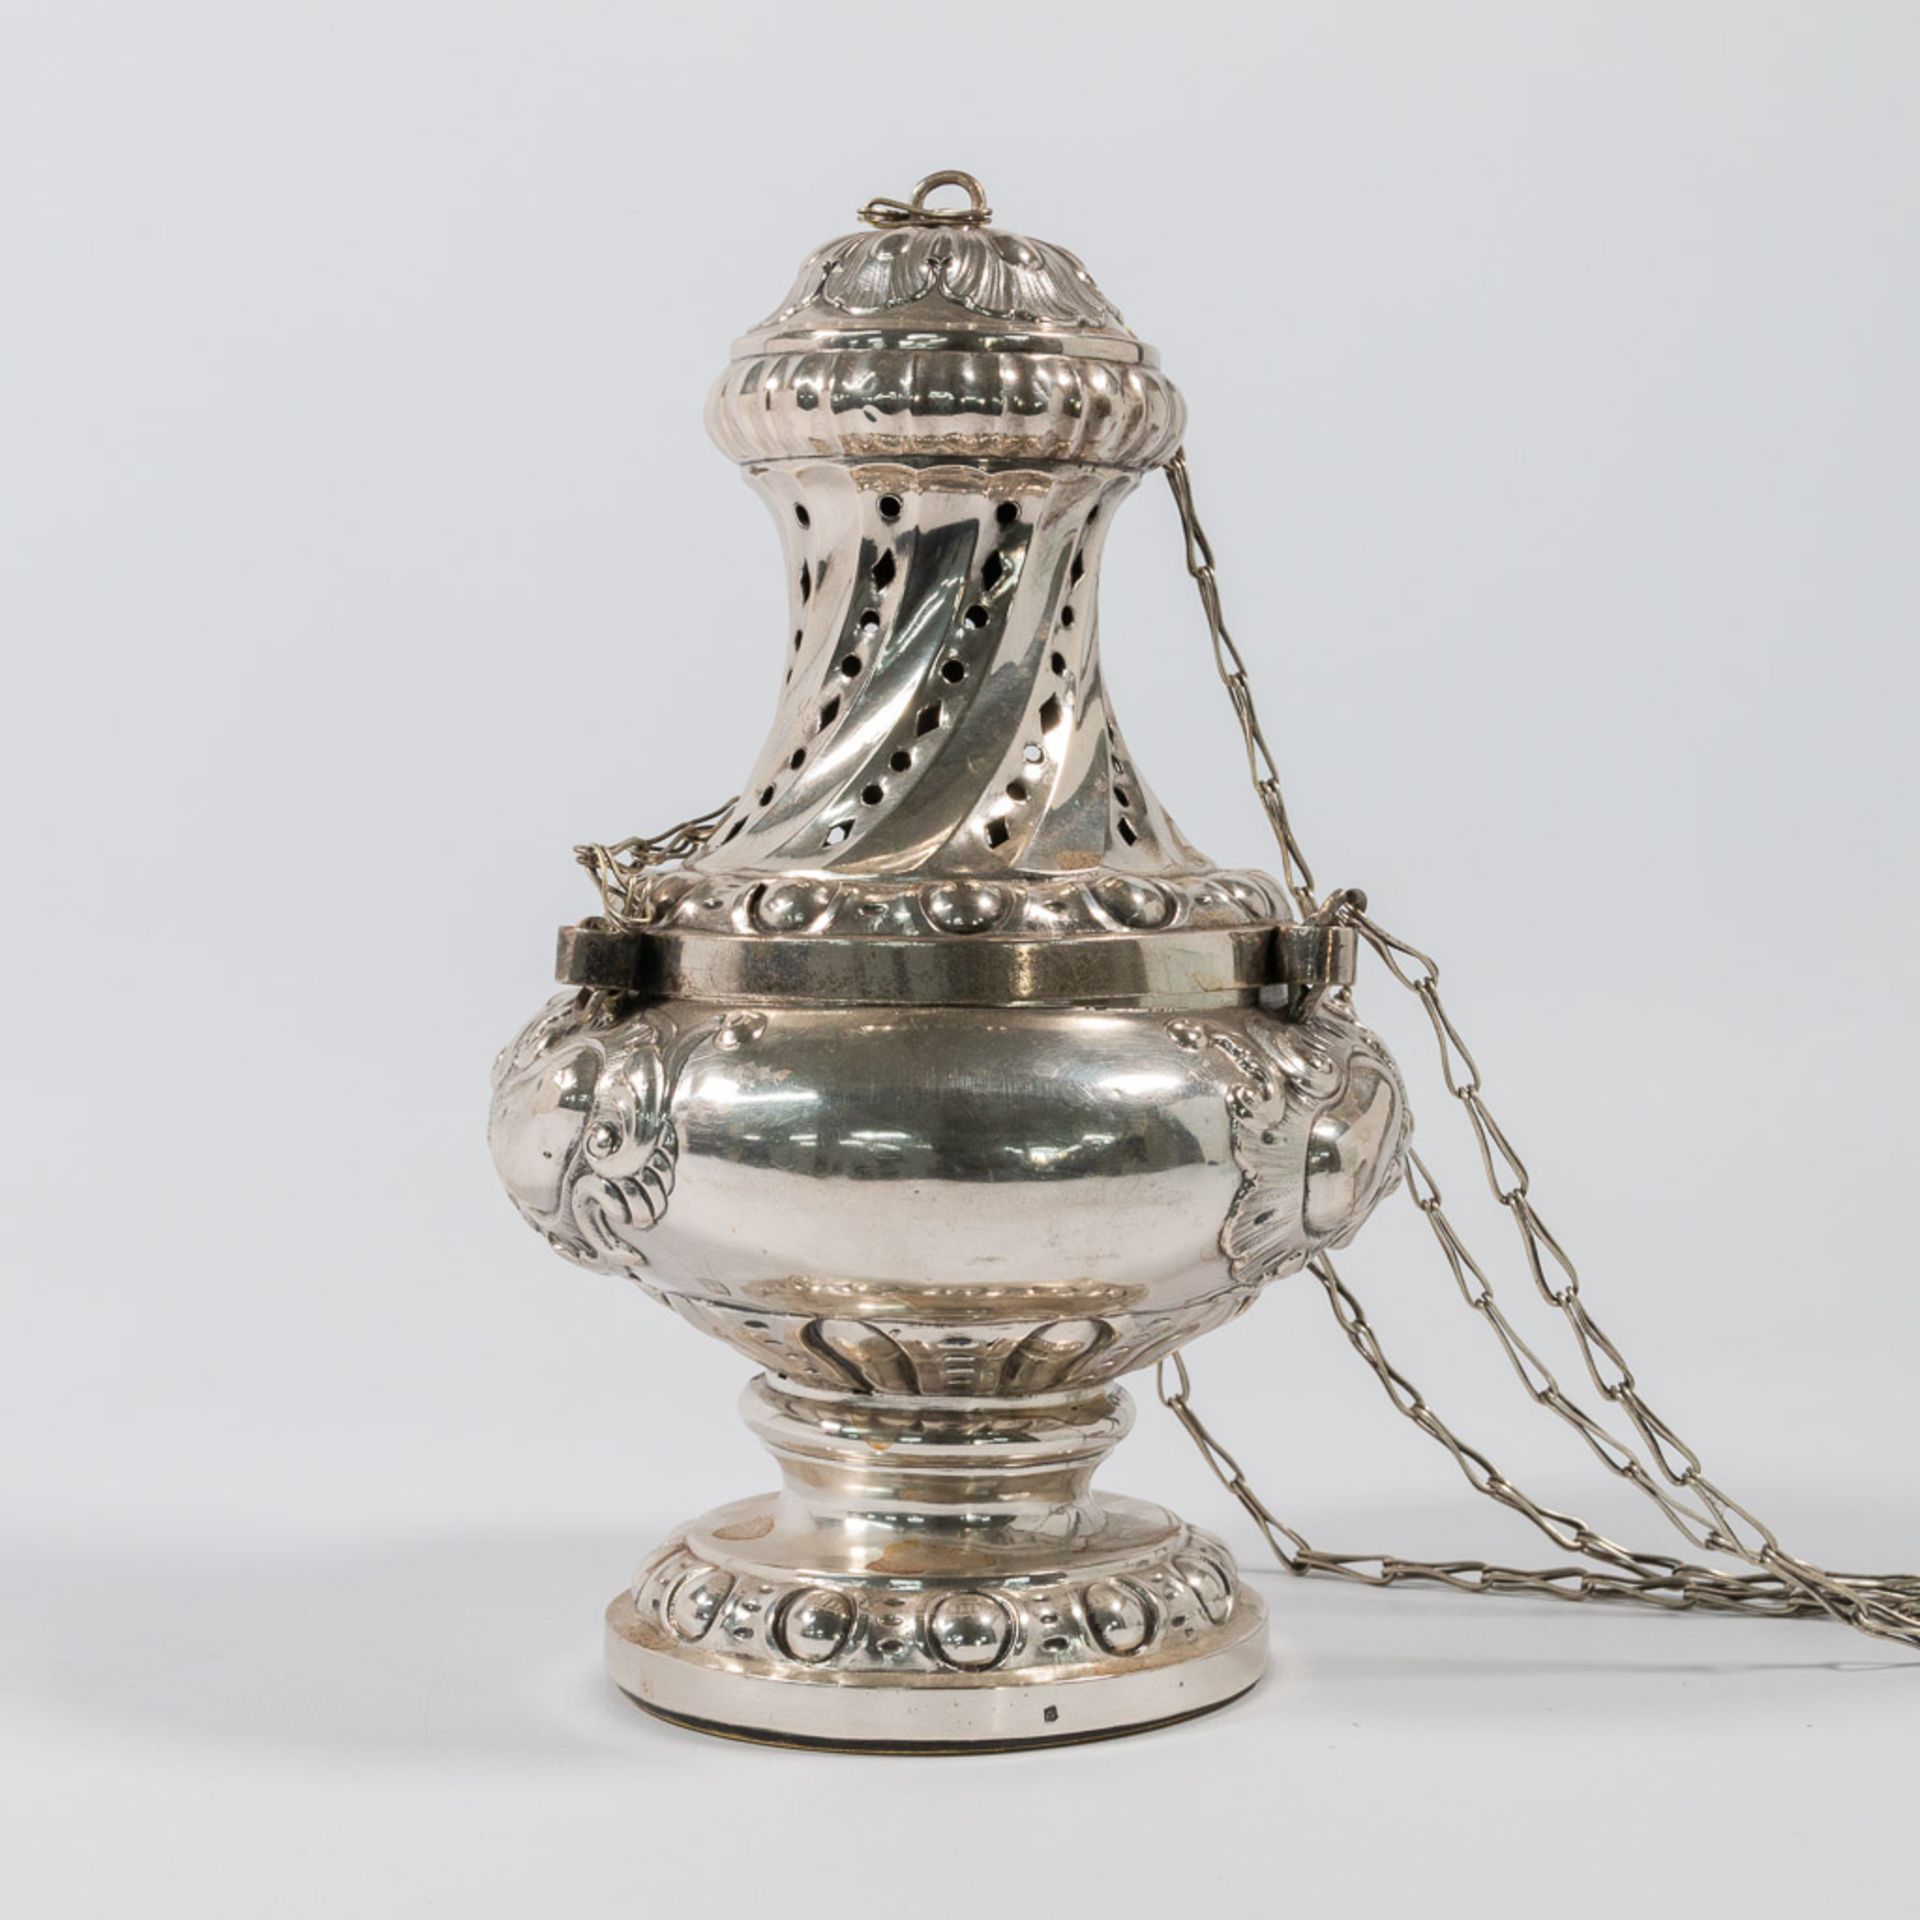 A silver Insence burner and Insence jar. - Image 25 of 39